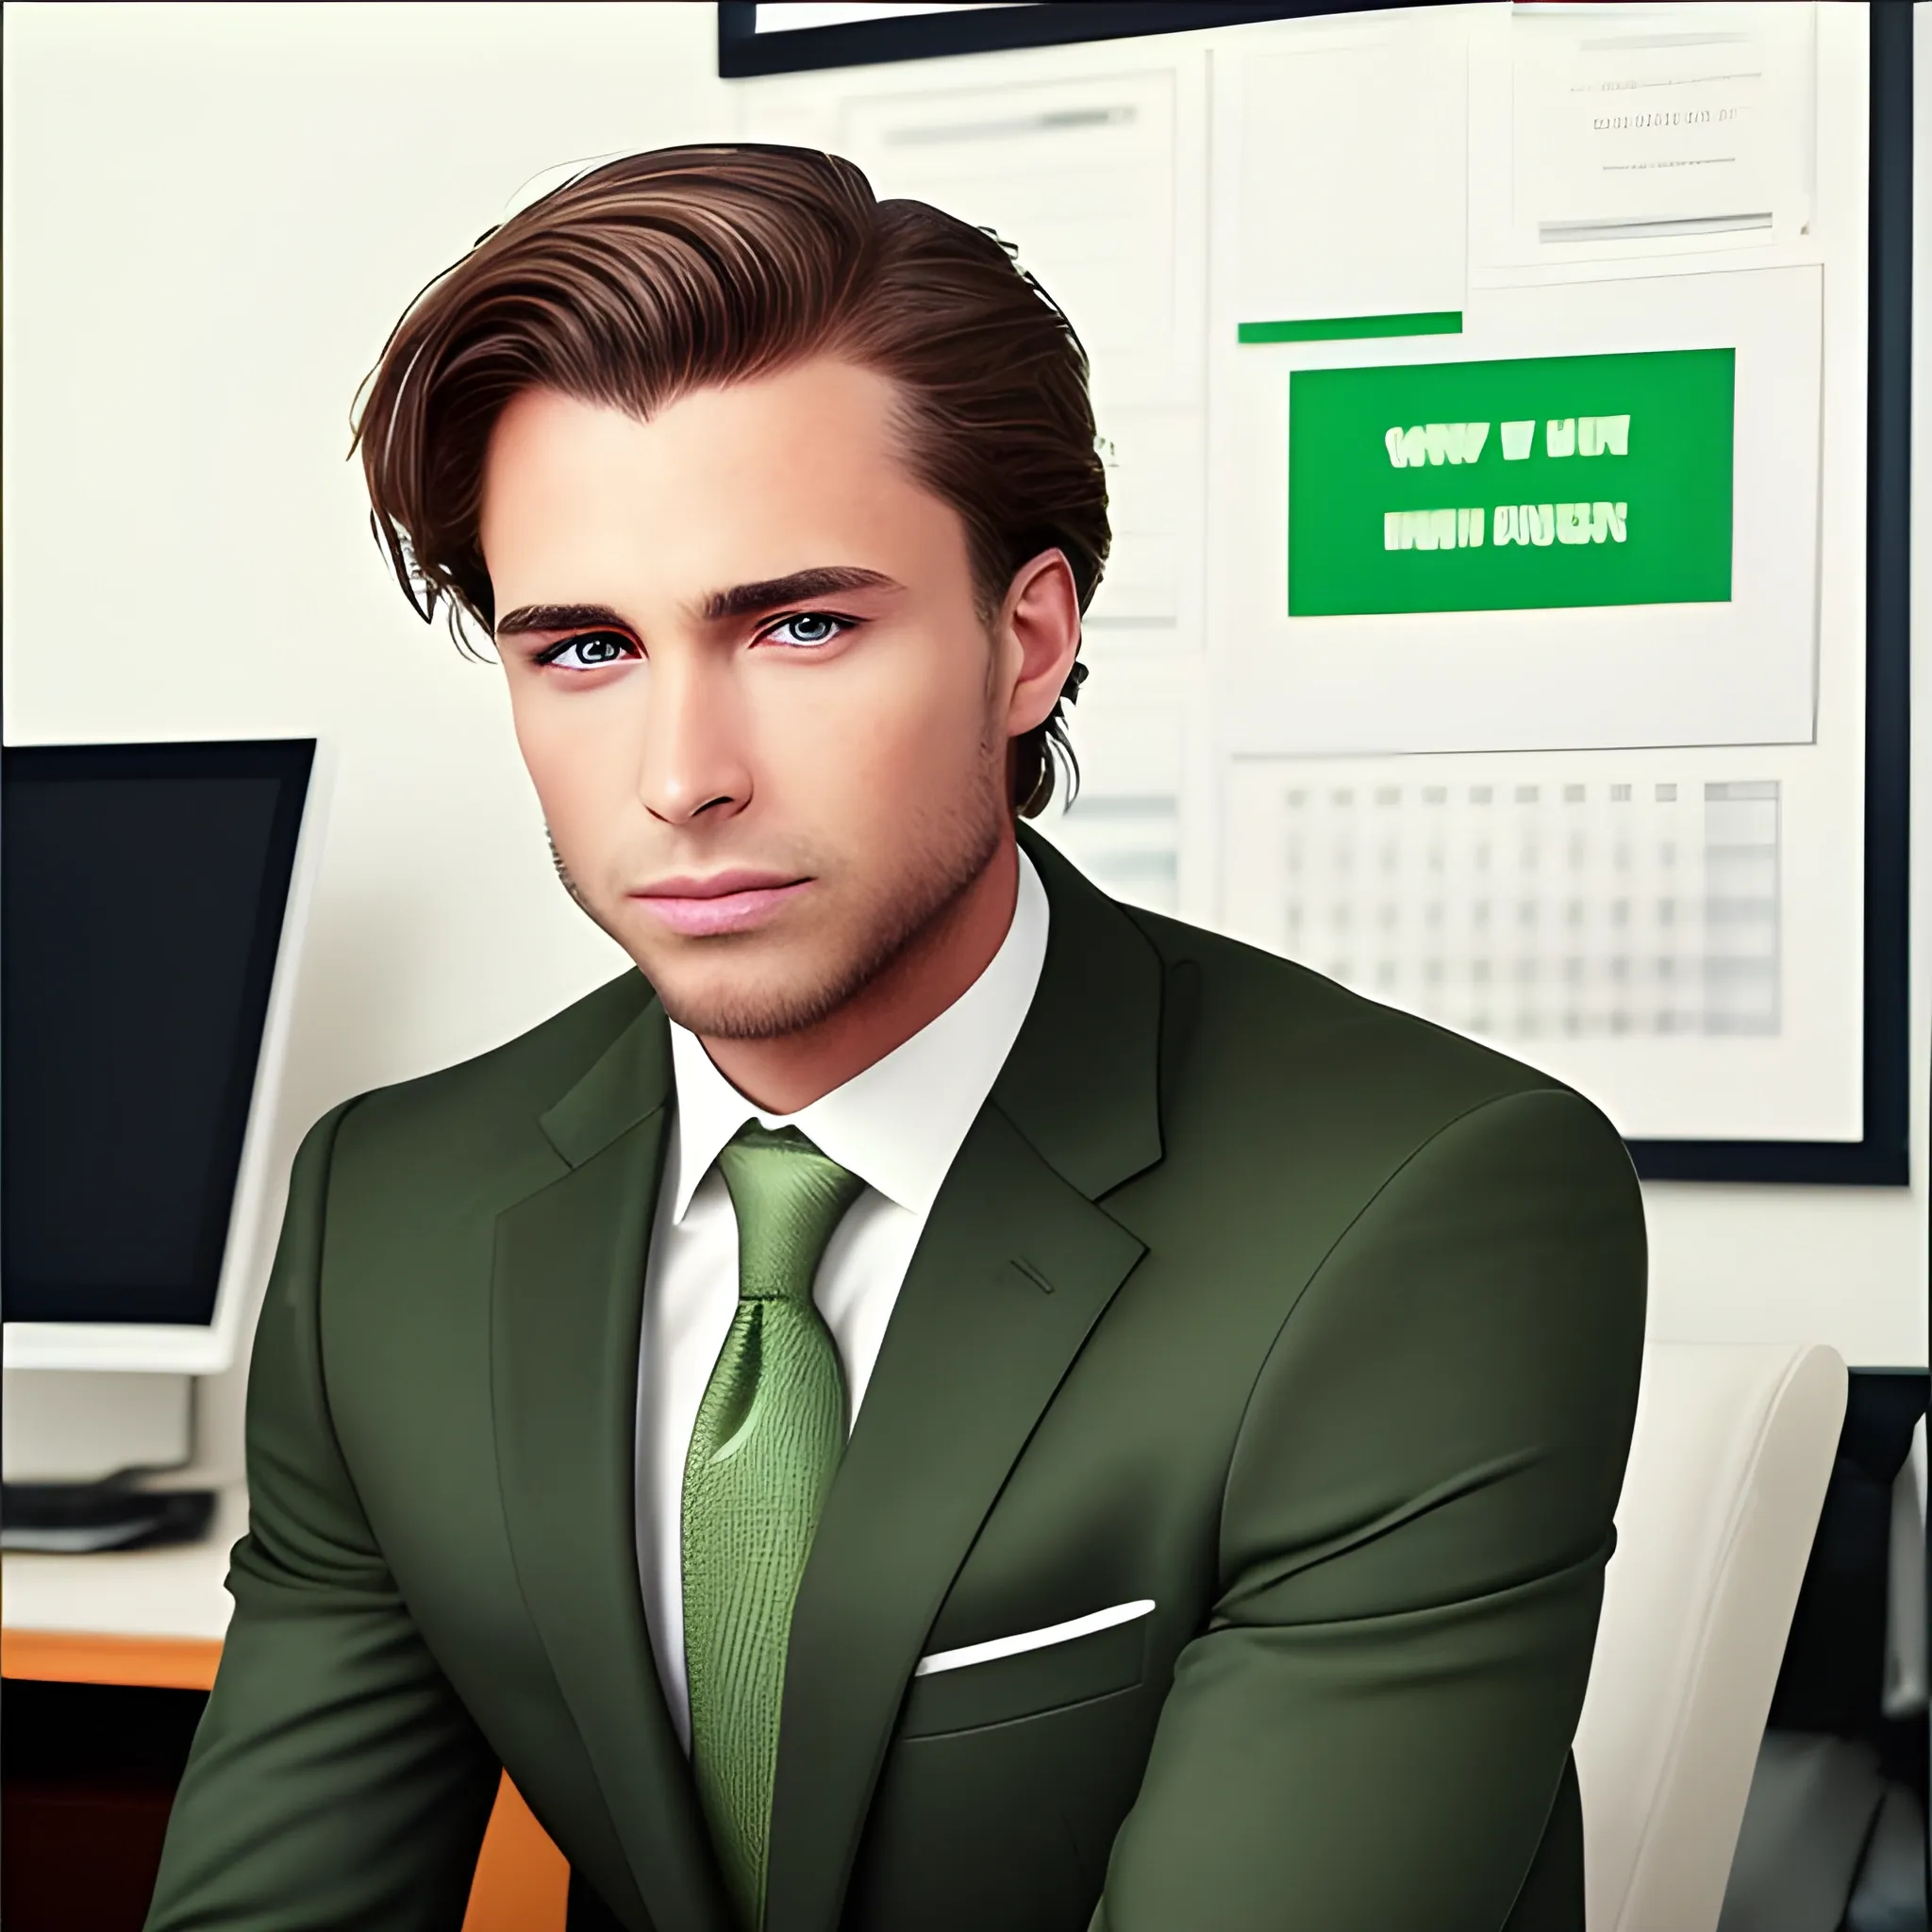 Brown well-groomed hair, green eyes, an expensive suit, a man is sitting in his expensive office.
"Brown well-groomed hair, green eyes, an expensive suit, a man is sitting in his expensive office.